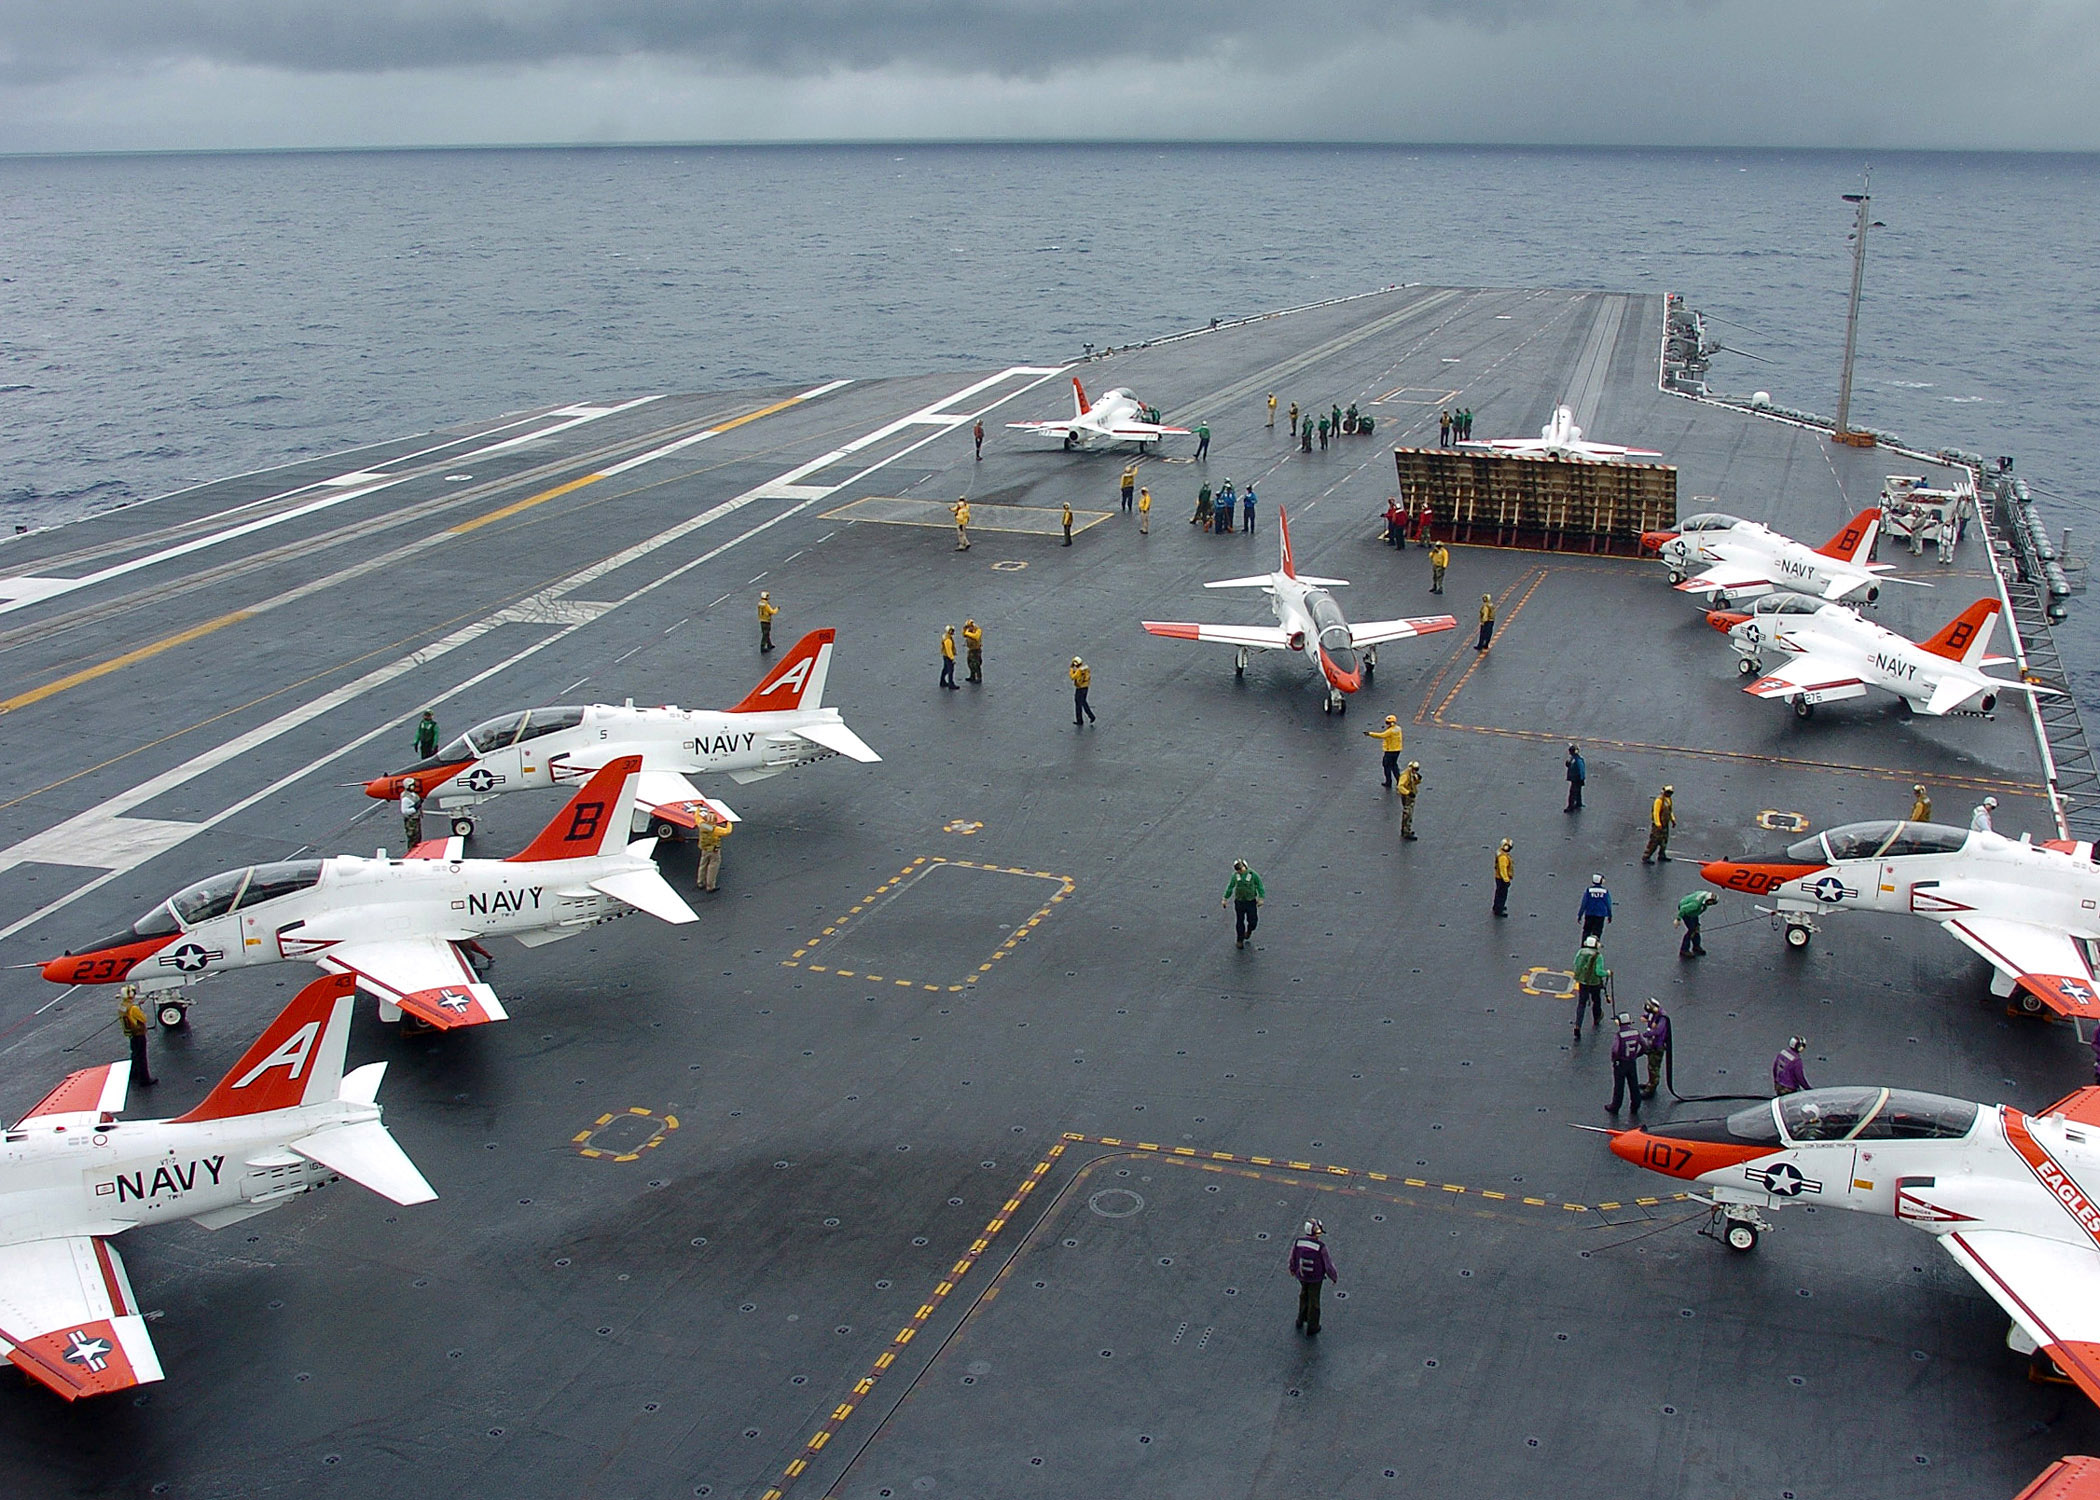 US_Navy_050624-N-0535P-006_A_T-45A_Goshawk_trainer_aircraft_assigned_to_Training_Air_Wings_One_and_Two_cover_the_flight_deck_aboard_the_Nimitz-class_aircraft_carrier_USS_Harry_S._Truman_%28CVN_75%29.jpg